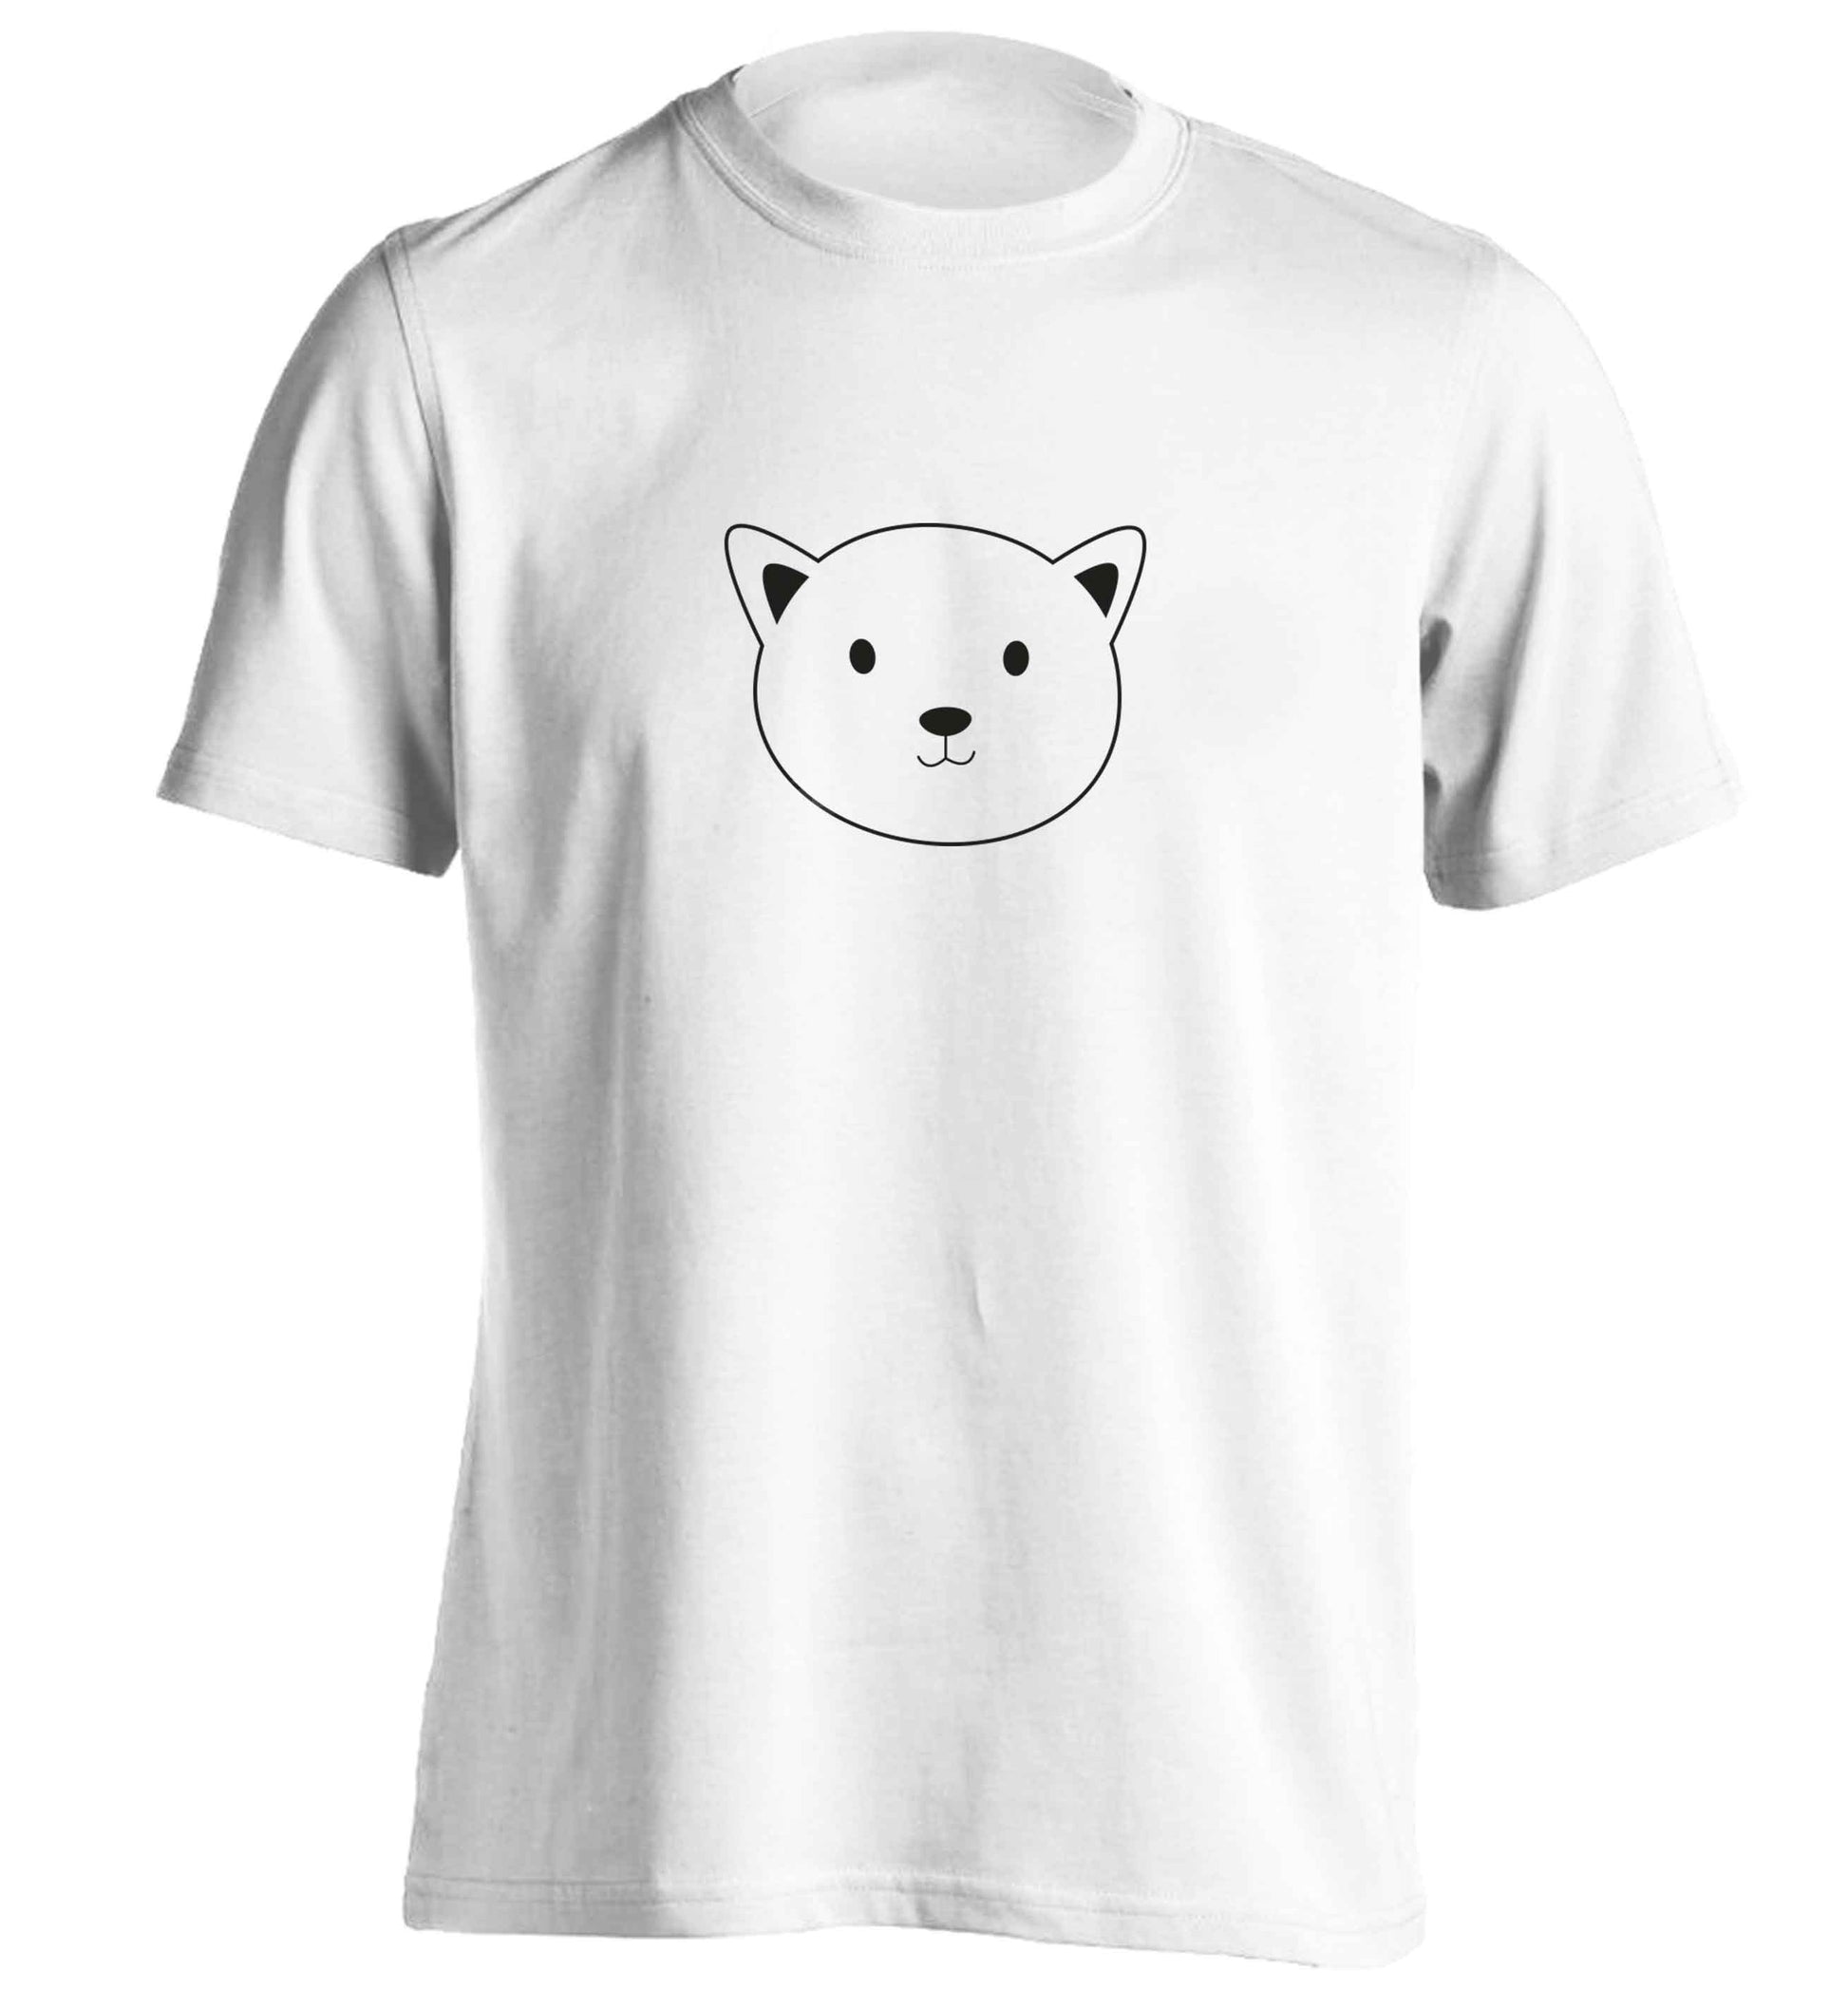 Cat face only Kit adults unisex white Tshirt 2XL